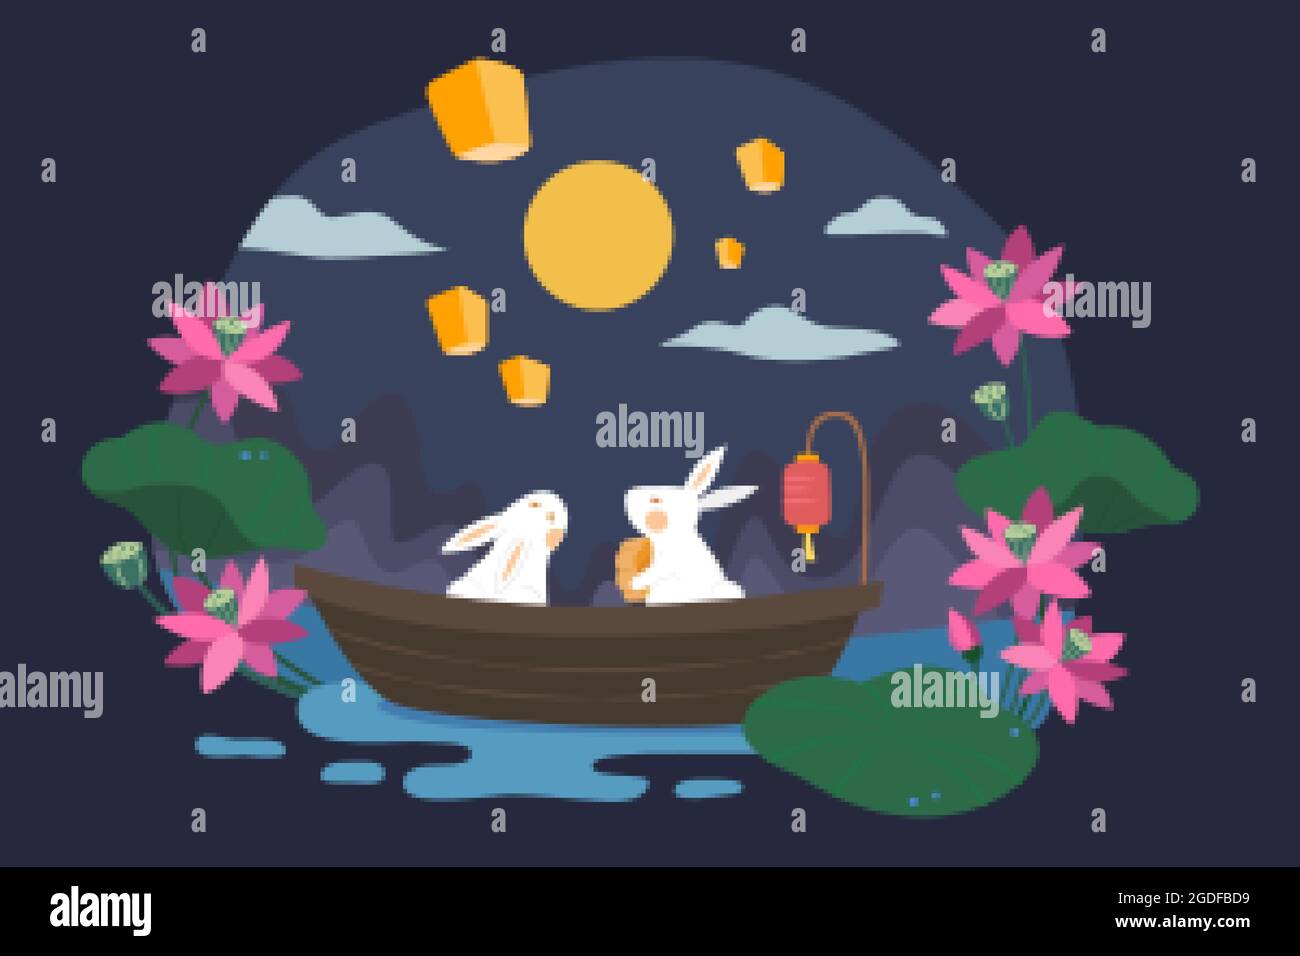 Mid autumn festival design. Flat illustration of jade rabbits eating mooncake on a boat floating on lotus pond and watching moon at night as holiday c Stock Vector